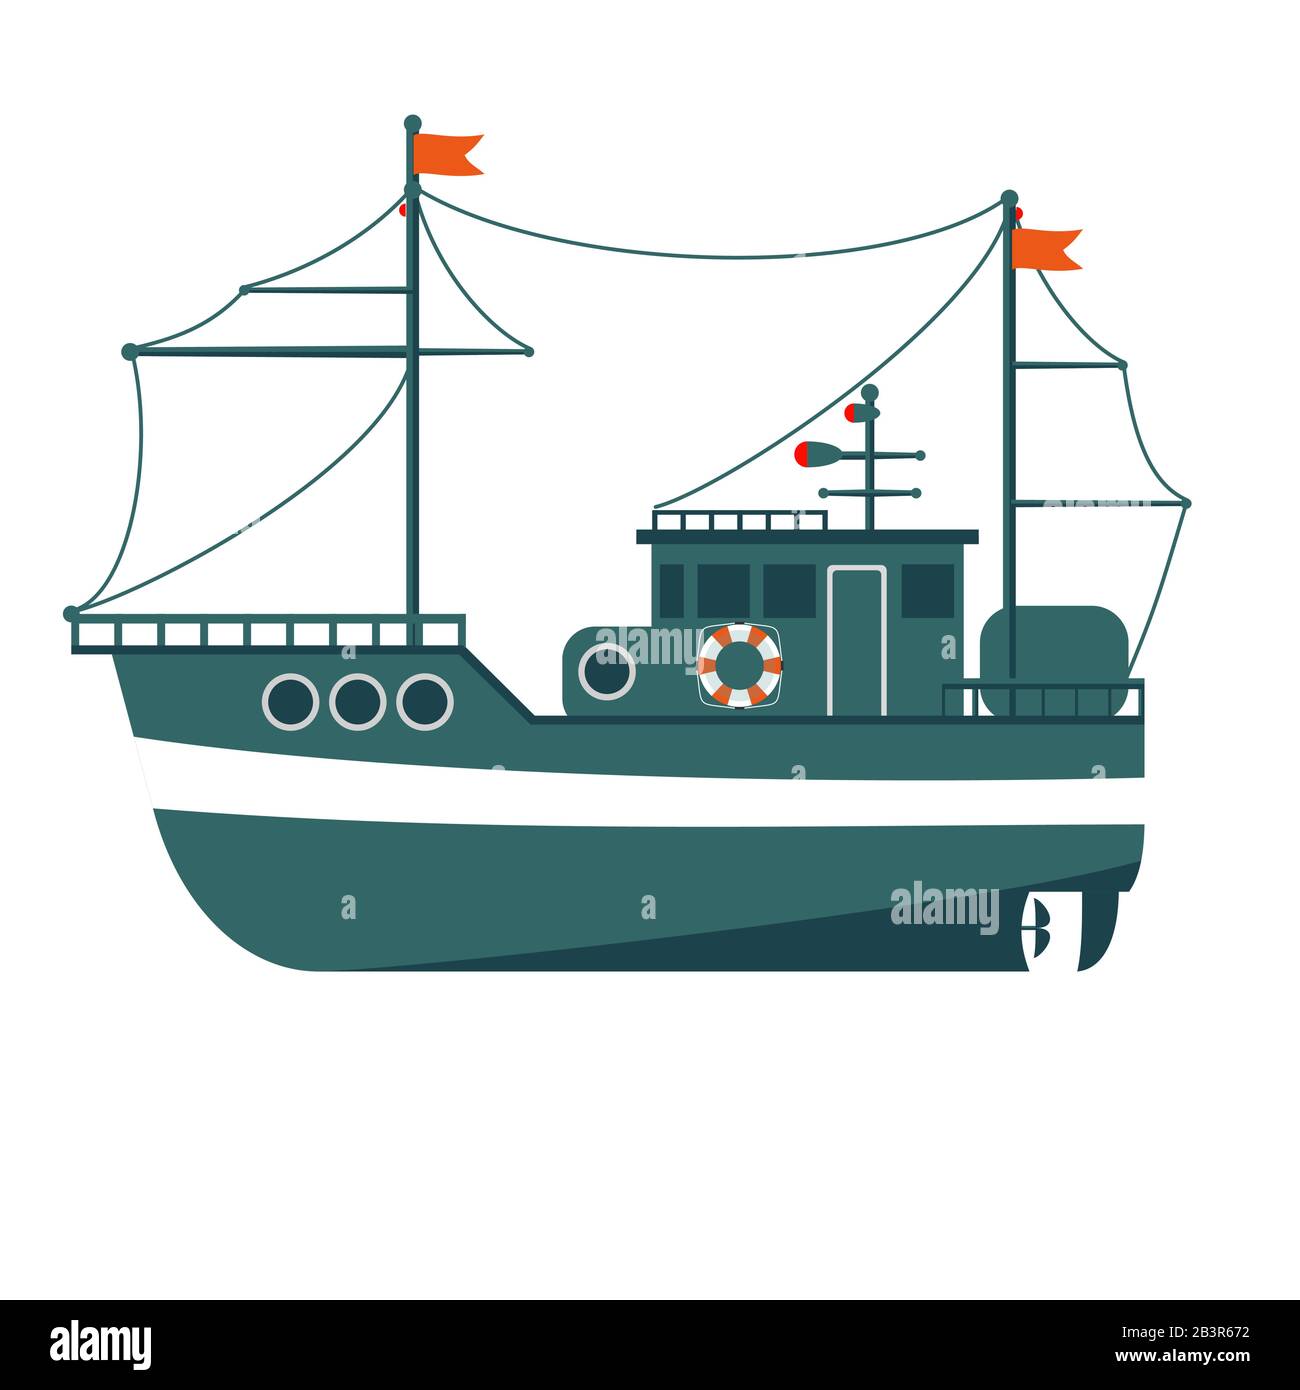 Commercial fishing boat side view . Sea or ocean transportation, marine ship for industrial seafood production Stock Vector